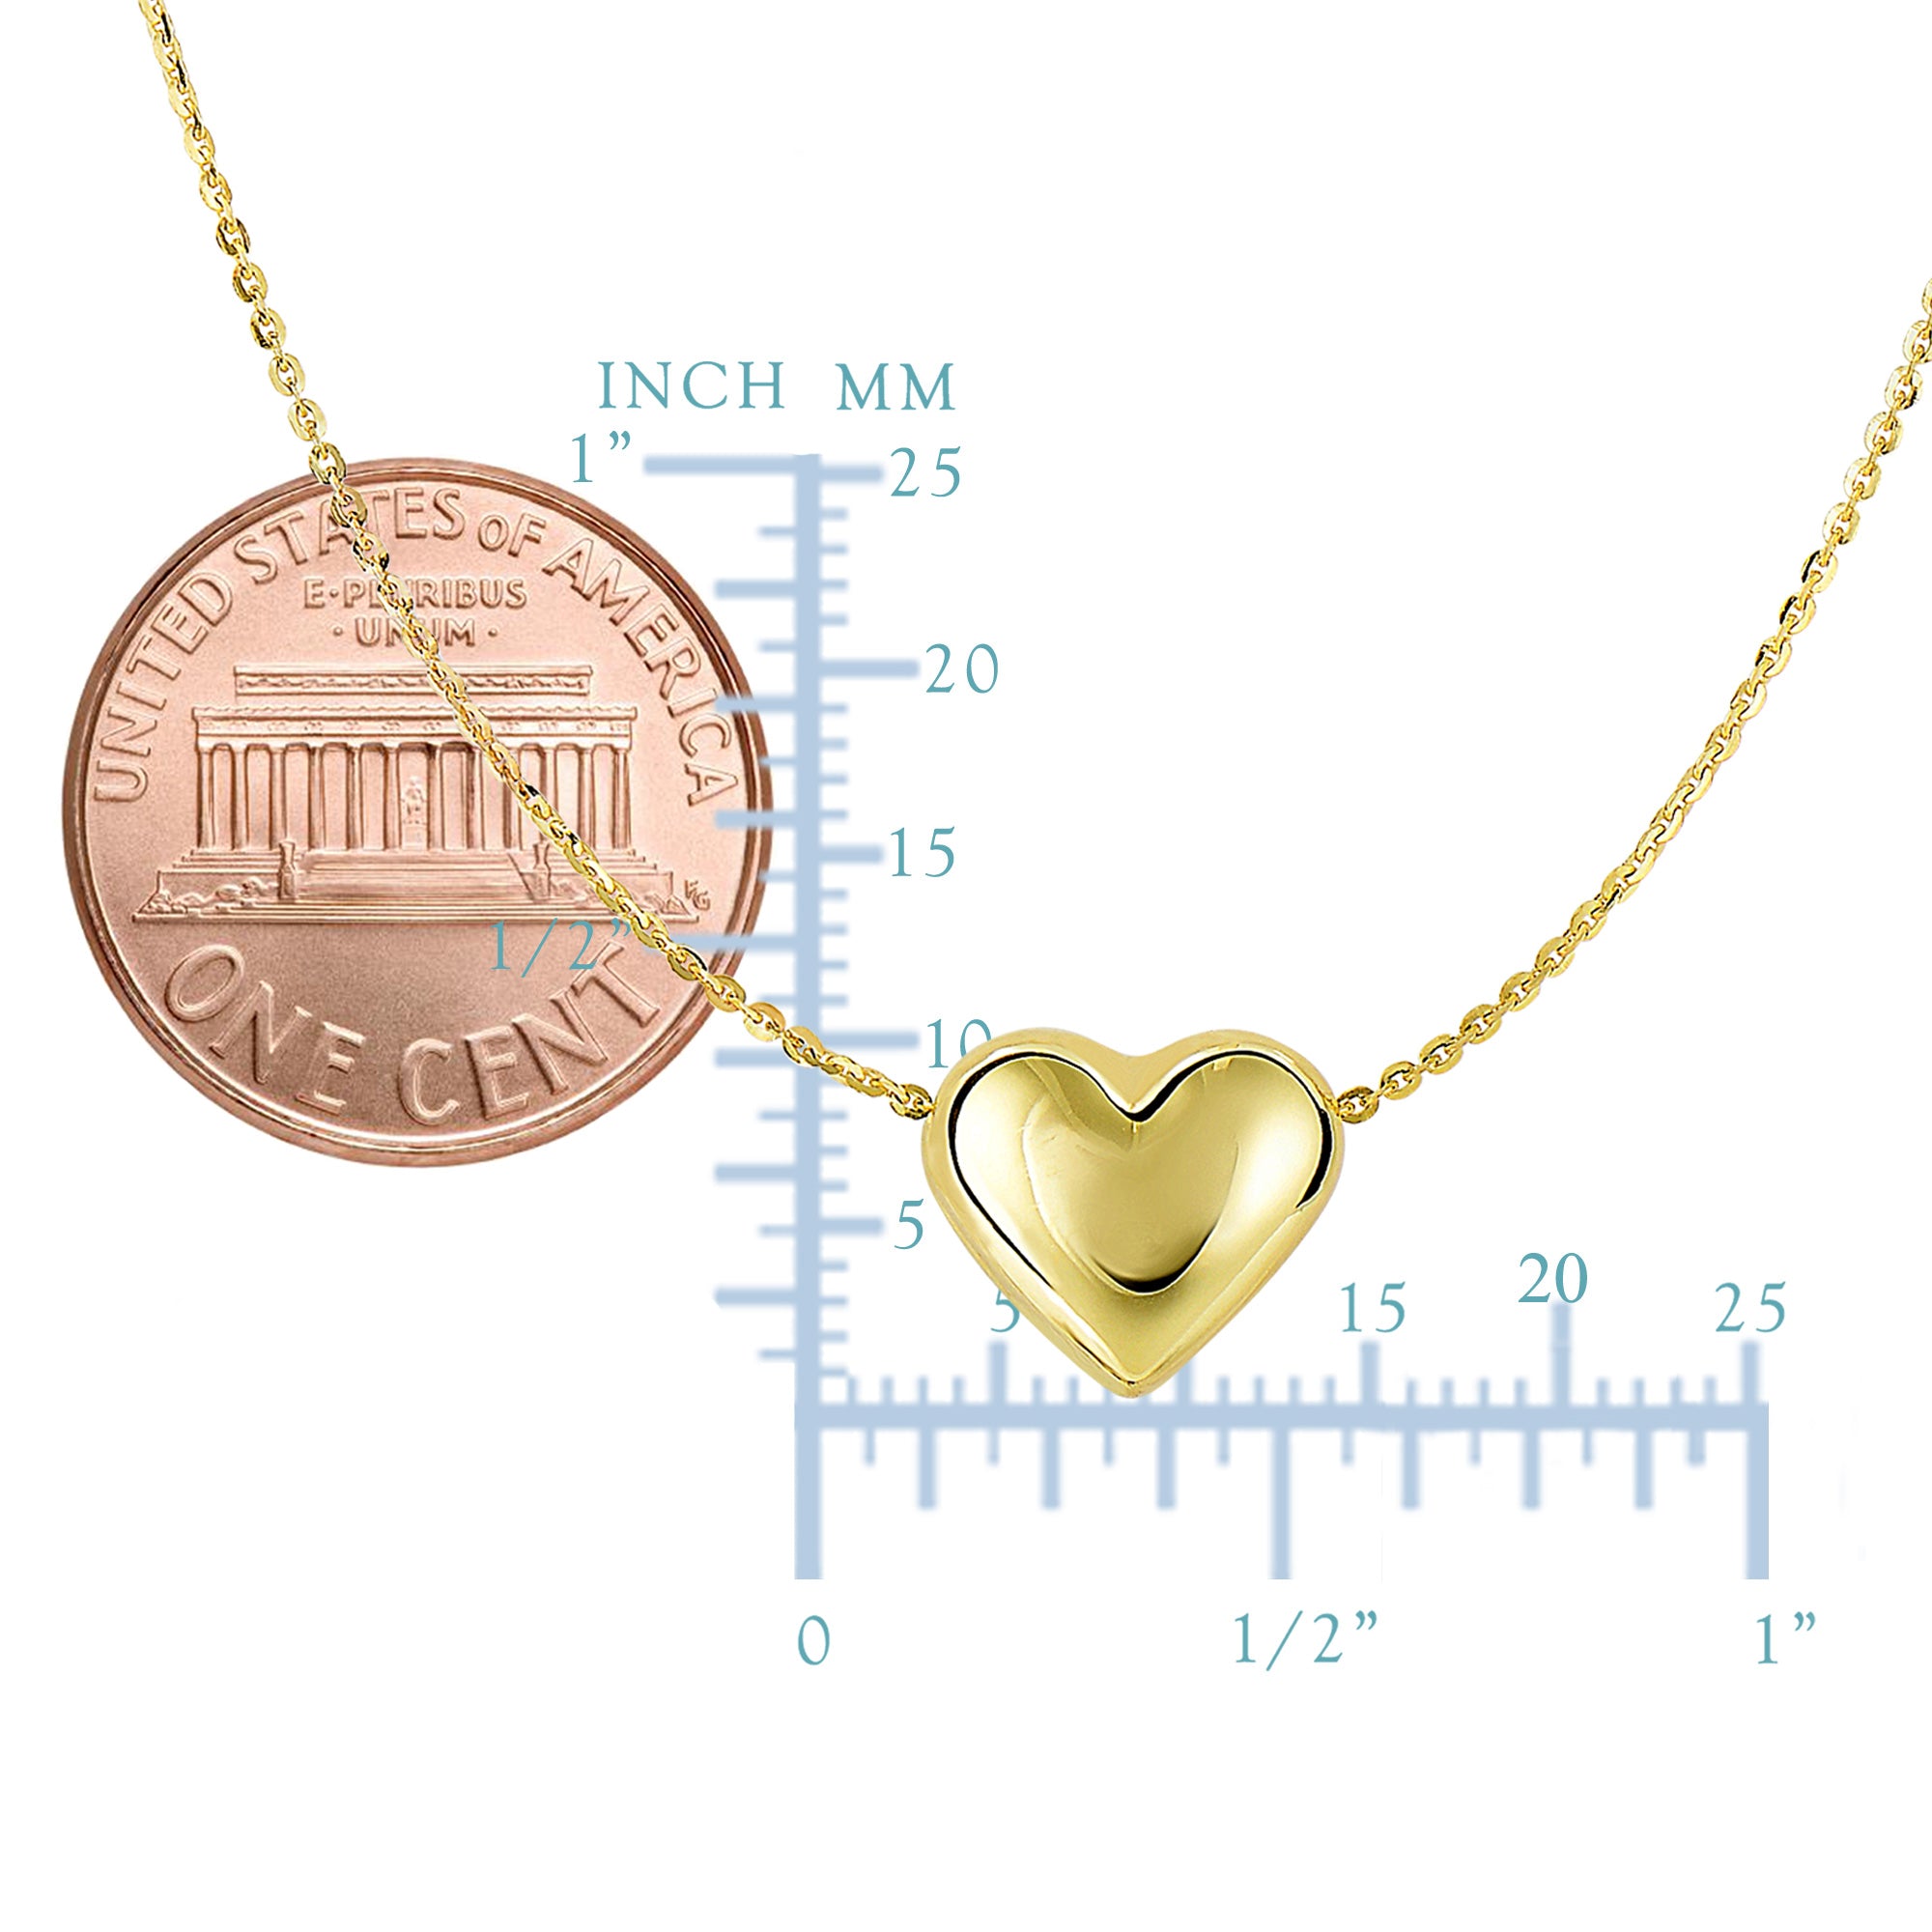 Real Gold Puffed Heart Pendant Necklace, 18" fine designer jewelry for men and women